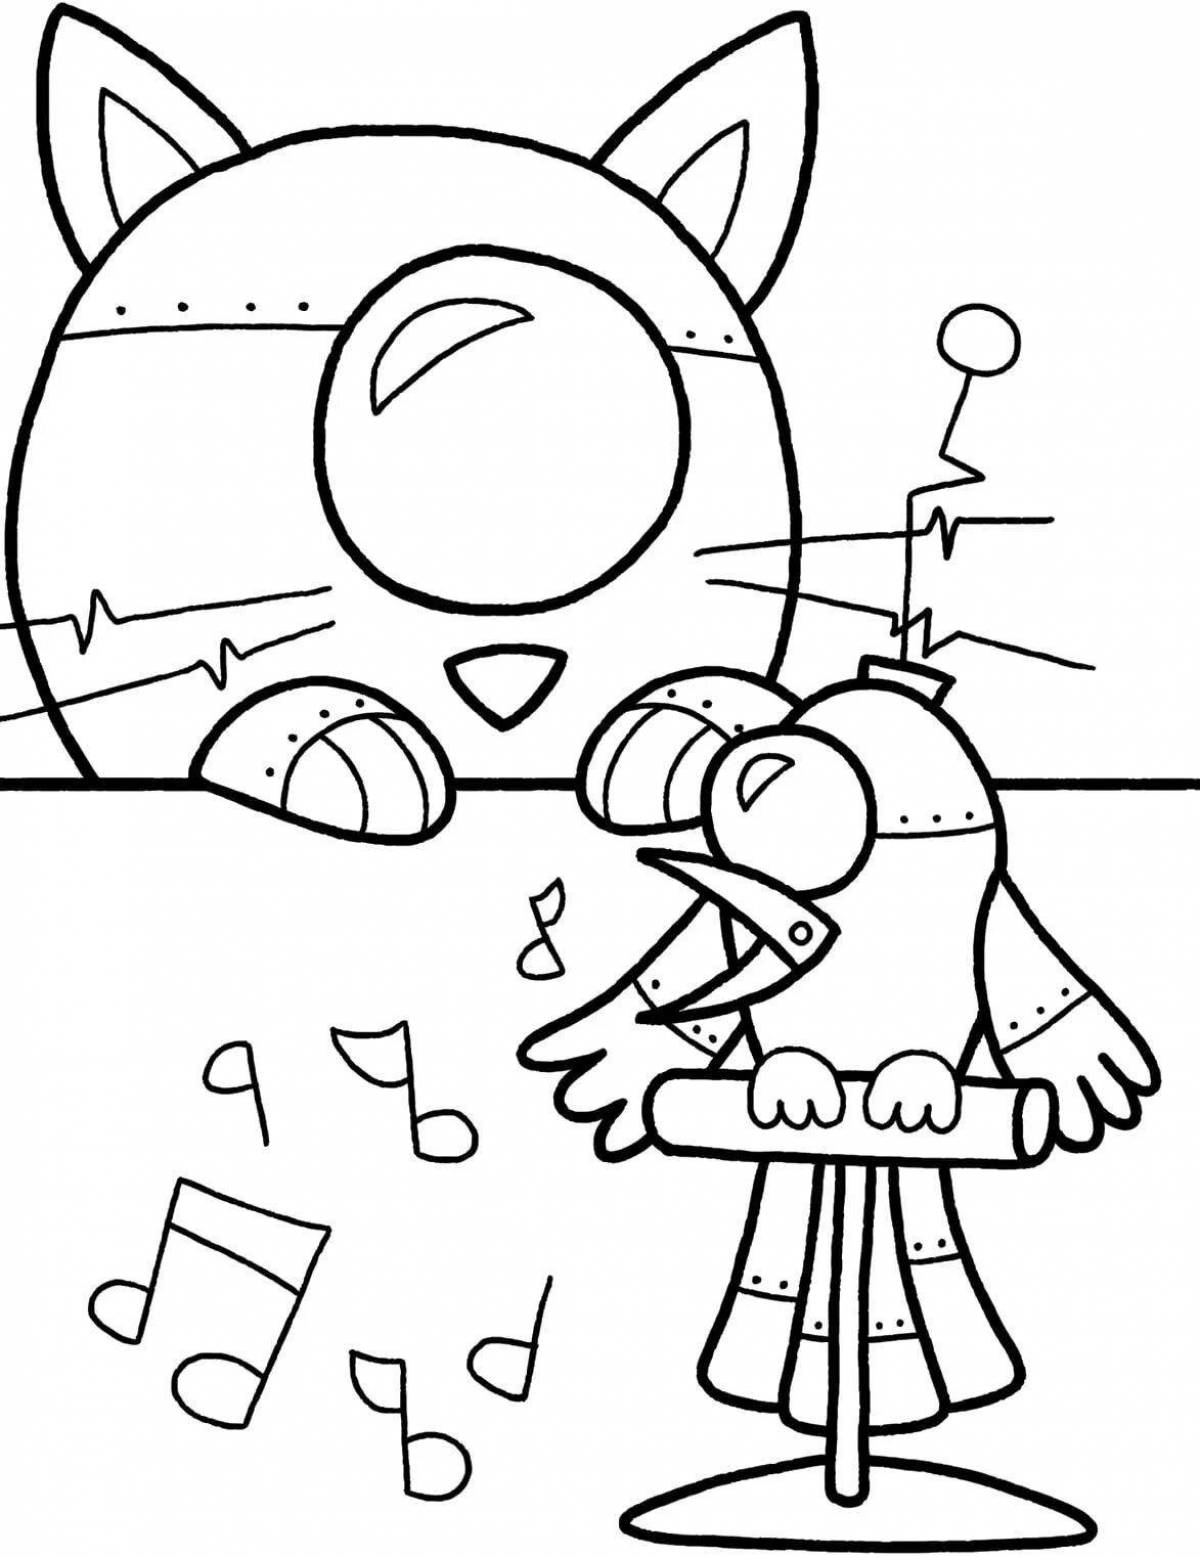 Colorful robot cat coloring page